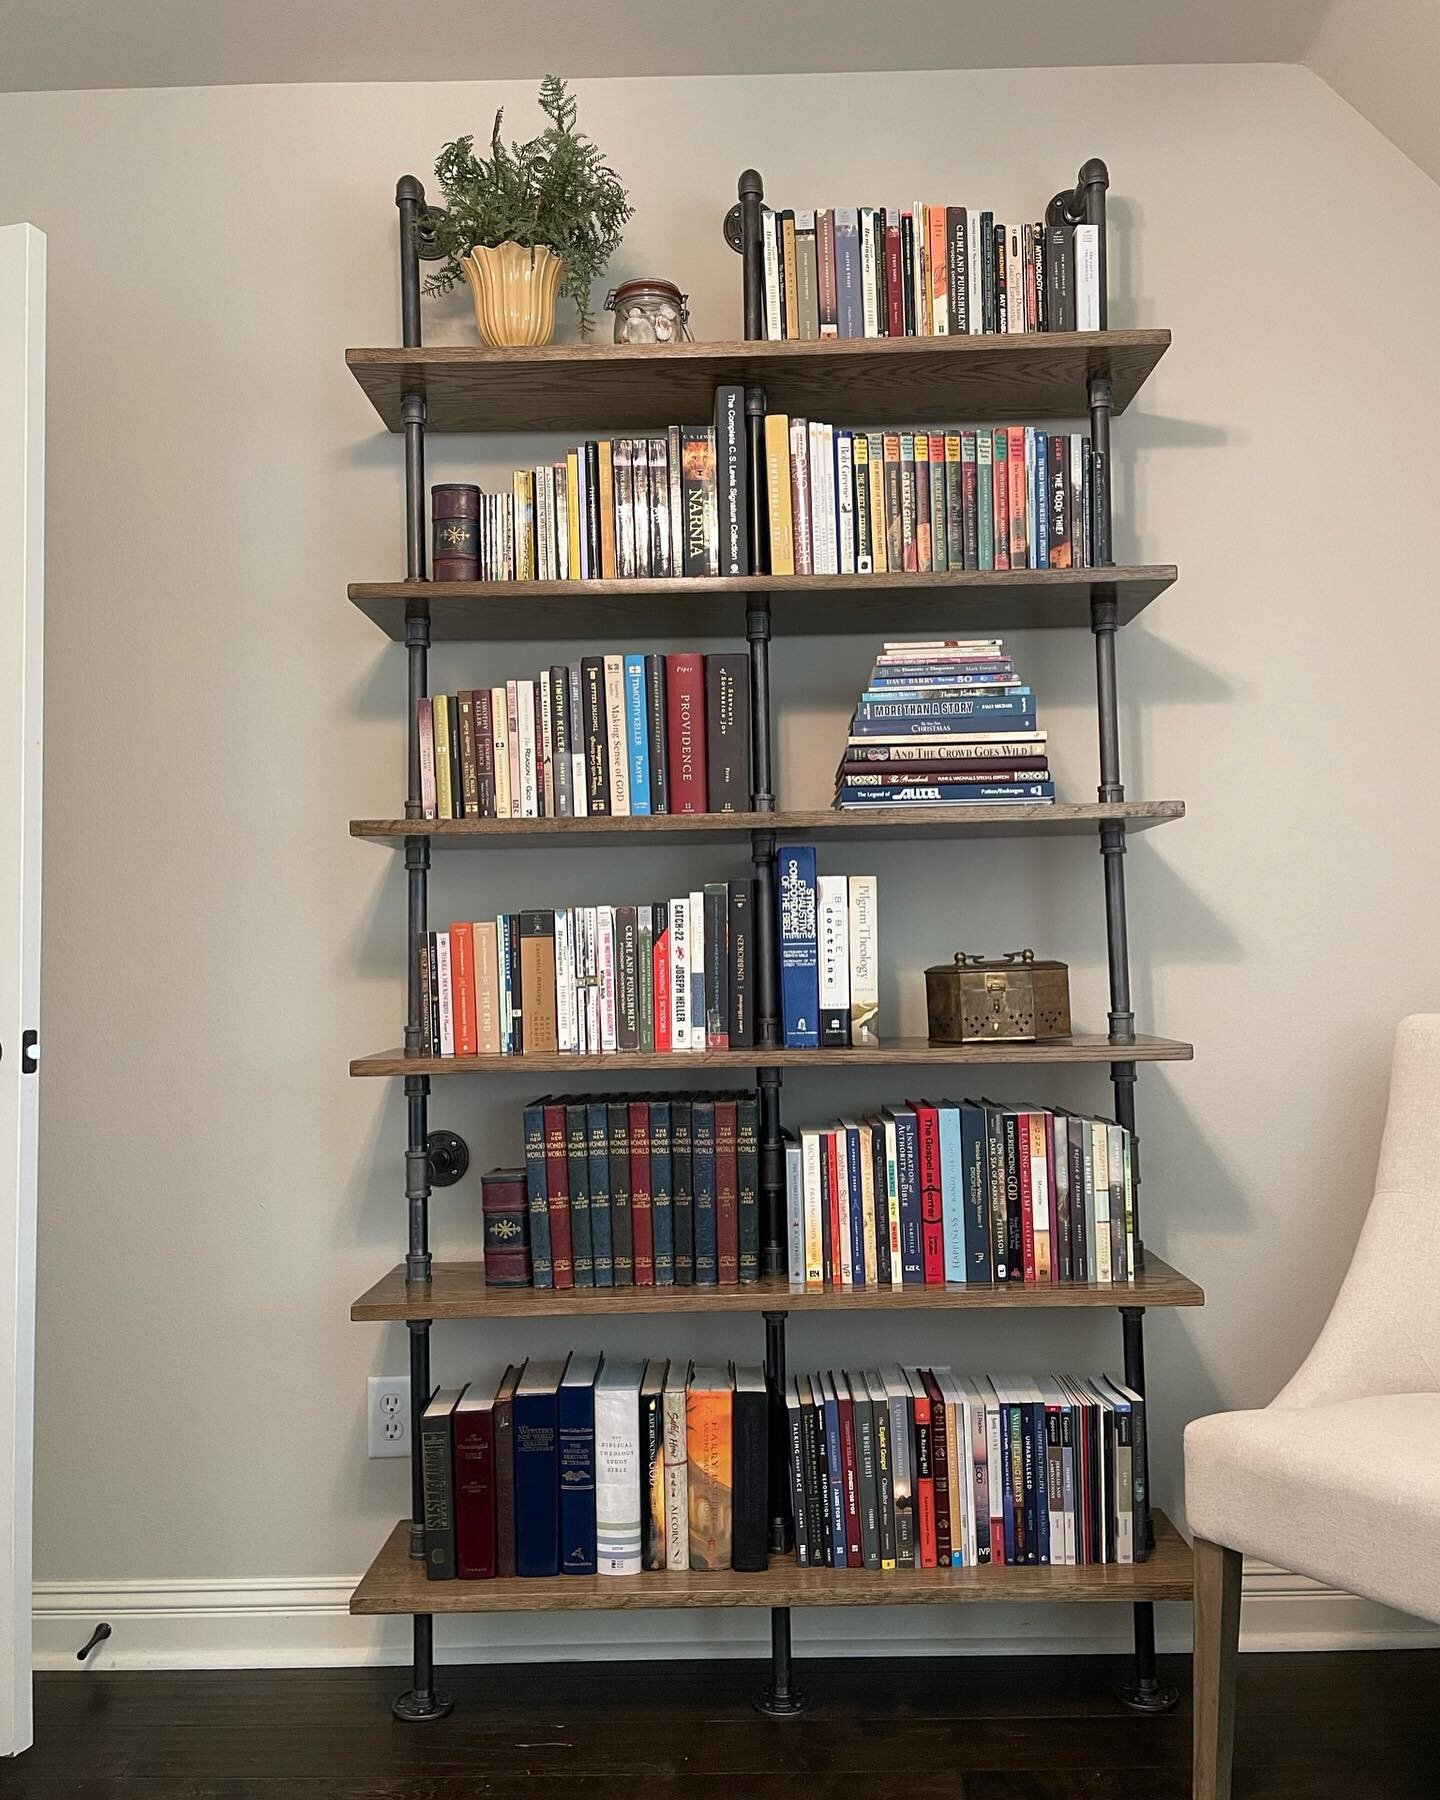 Basic shelves becomes artwork when it&rsquo;s custom made! When furniture is handmade it&rsquo;s more than just a basic piece, it becomes art that reflects the personality of the owner. Schedule a consultation today so we can create a piece of art th